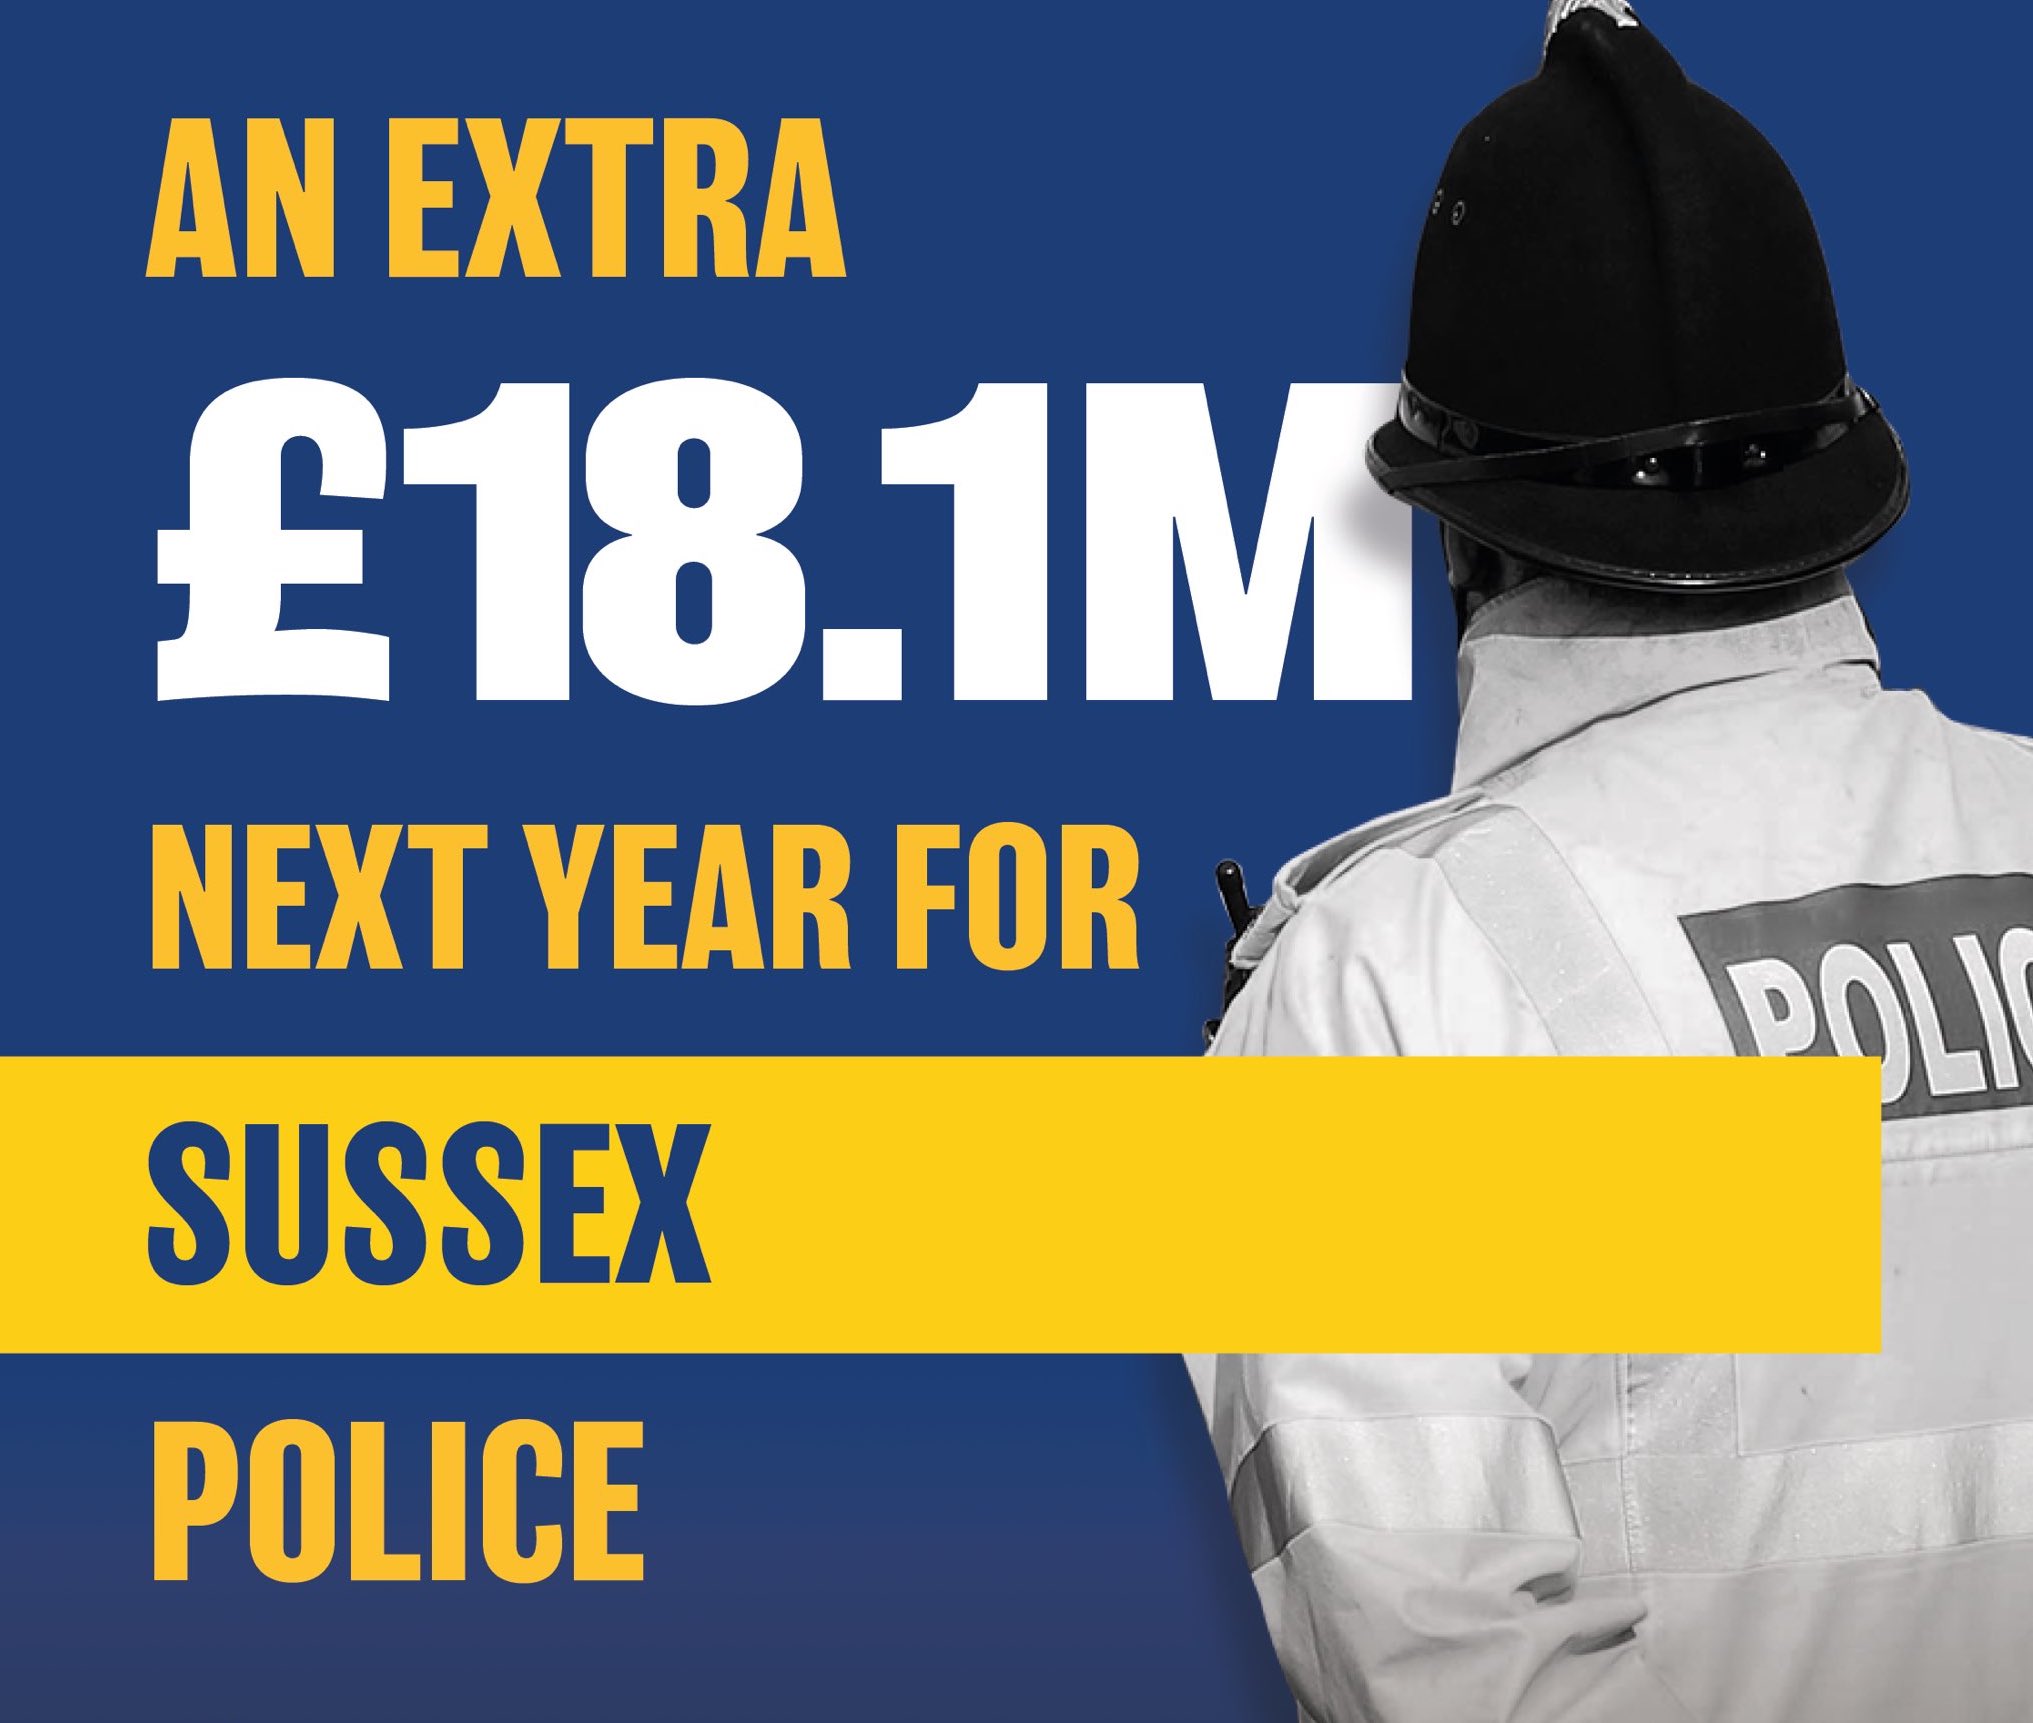 sussex police fed travel insurance